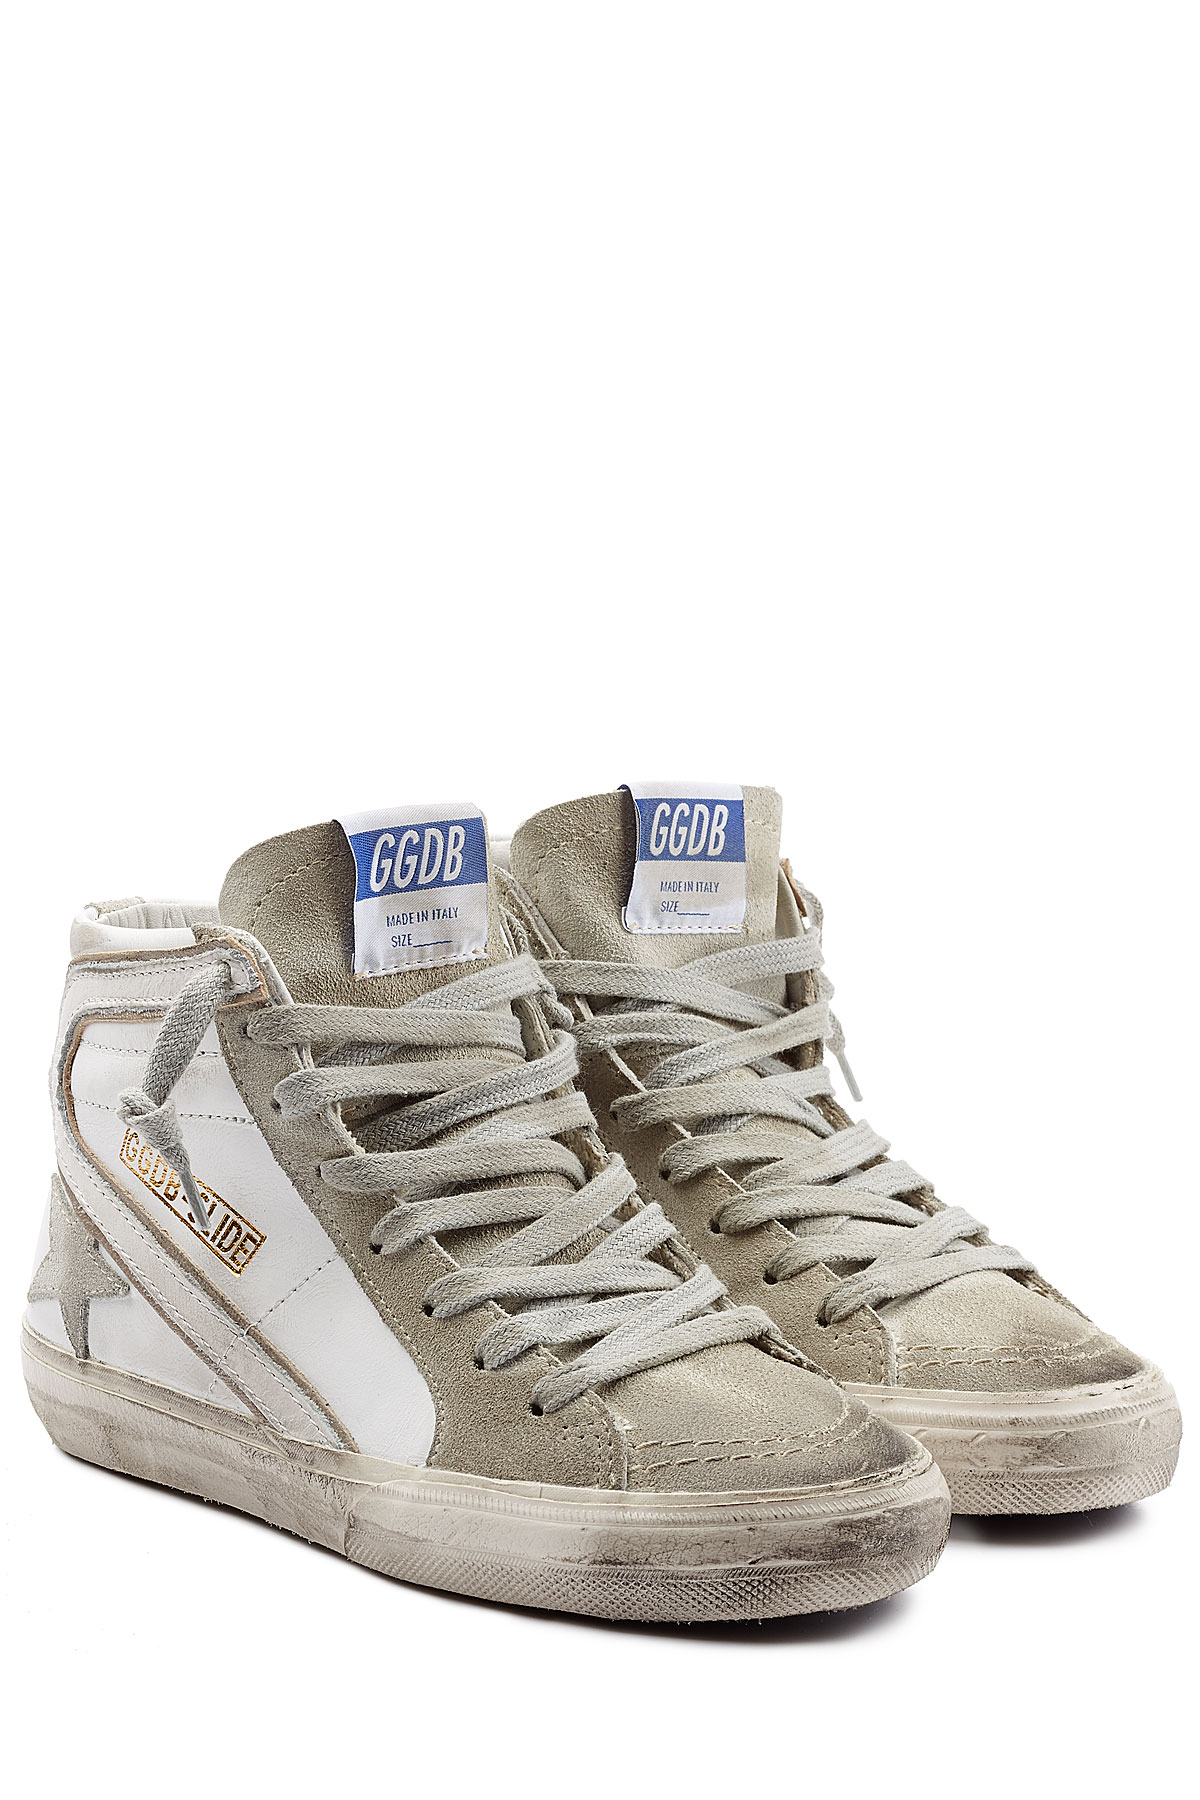 Lyst - Golden Goose Deluxe Brand Slide Leather Sneakers - White in White